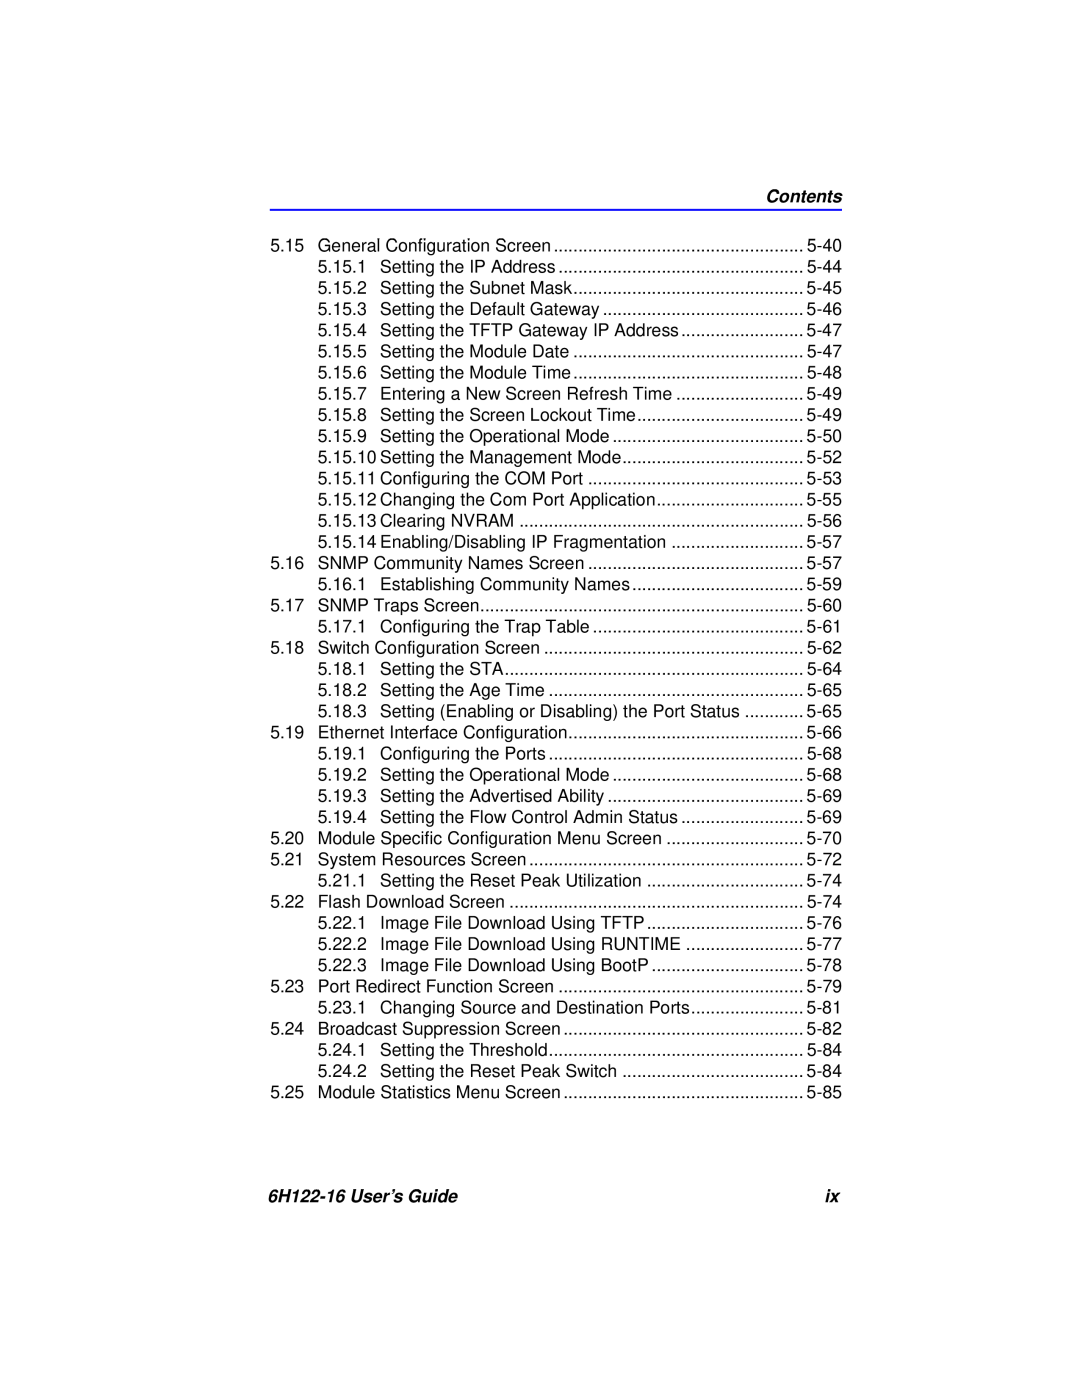 Cabletron Systems manual Contents, 6H122-16 User’s Guide 